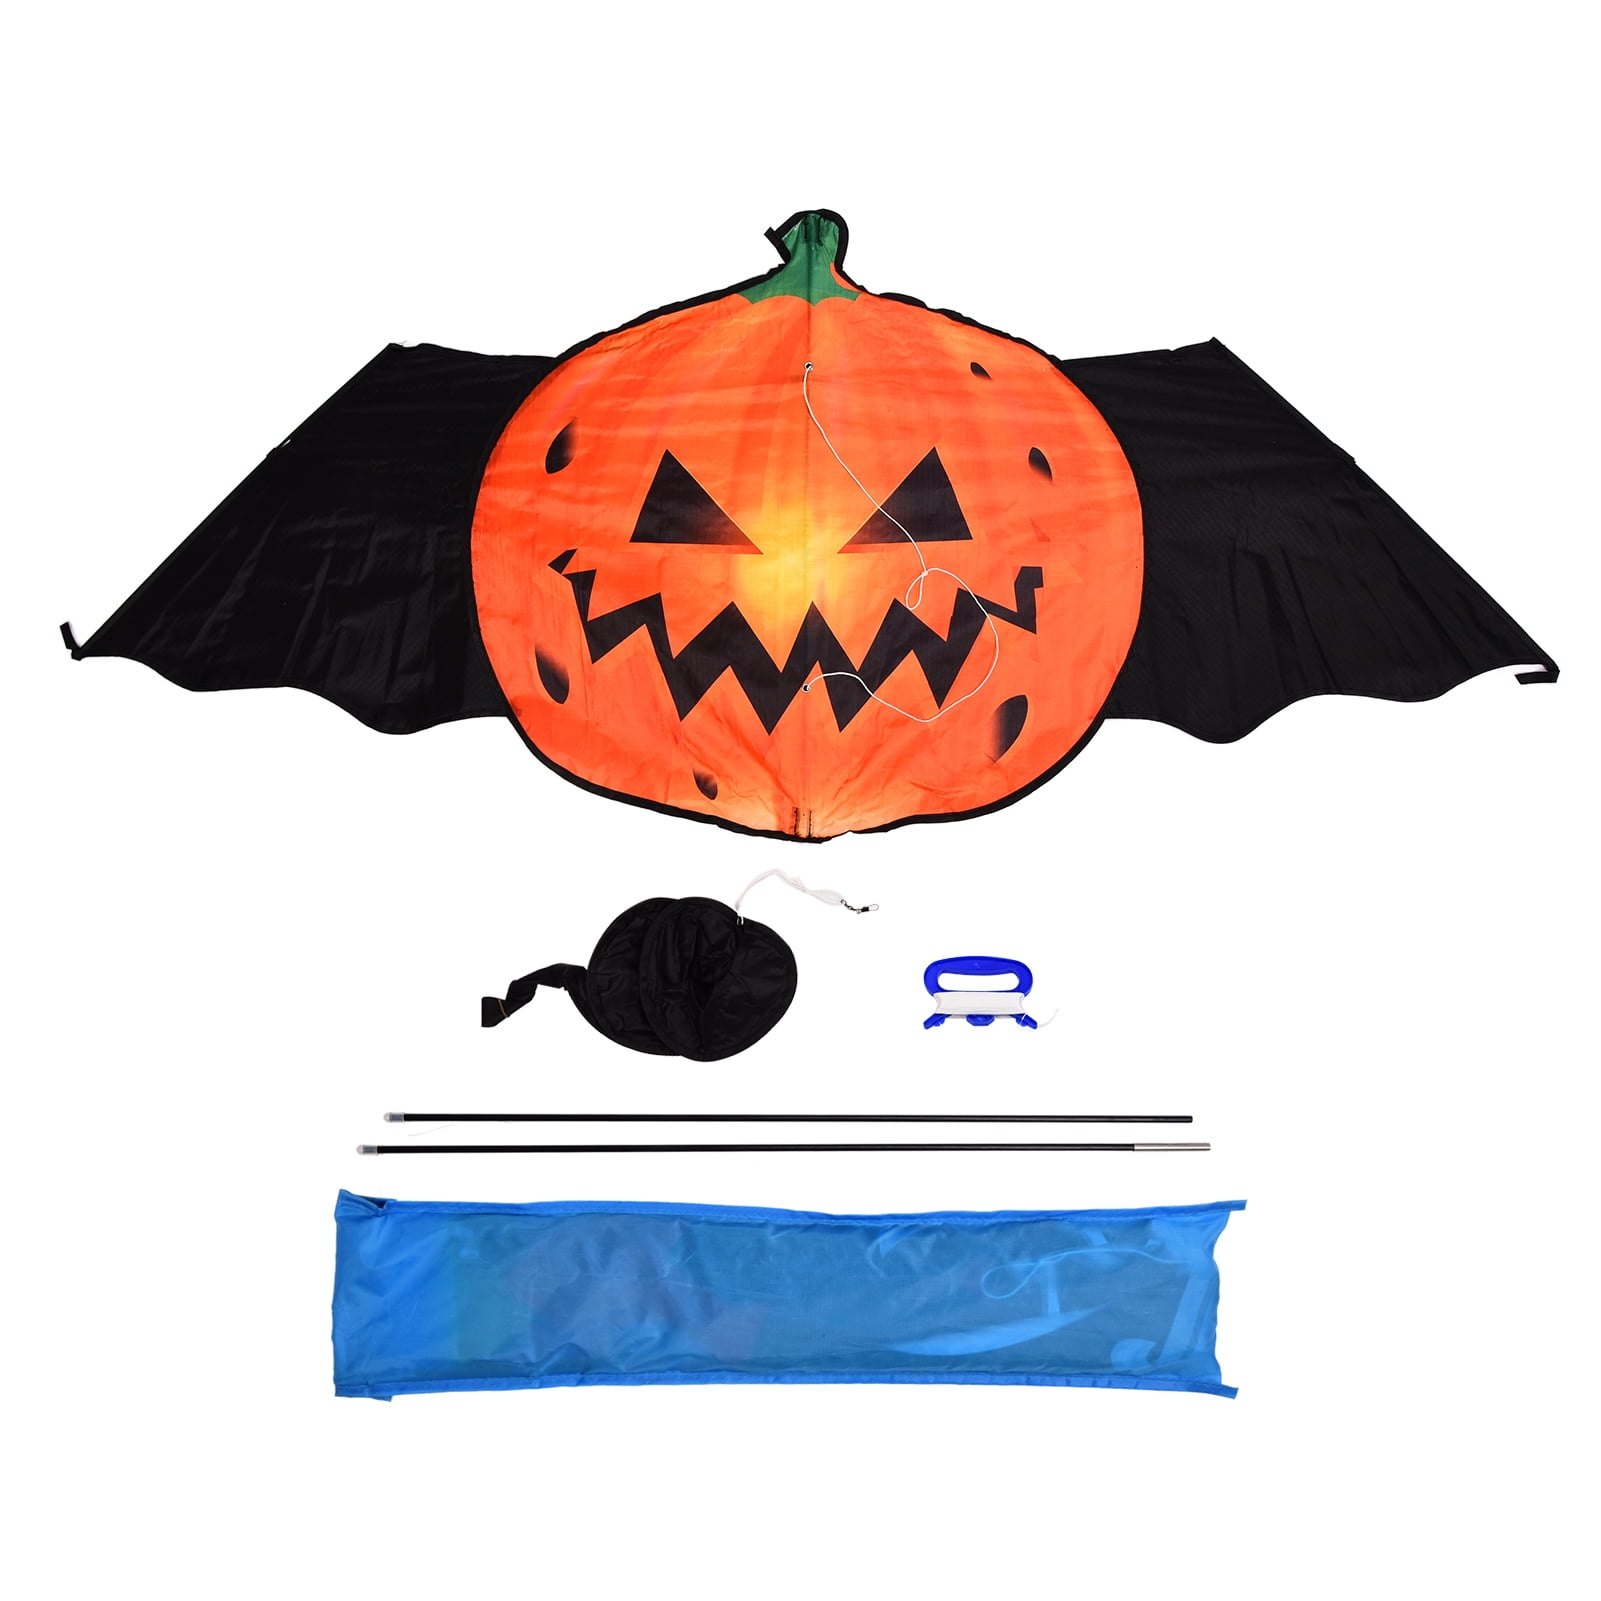 Exquisite　Tear　Polyester　Cartoon　Pumpkin　Children　For　210T　Durable　Holiday　Resistant　For　Strong　Beach　Kite,　Kite